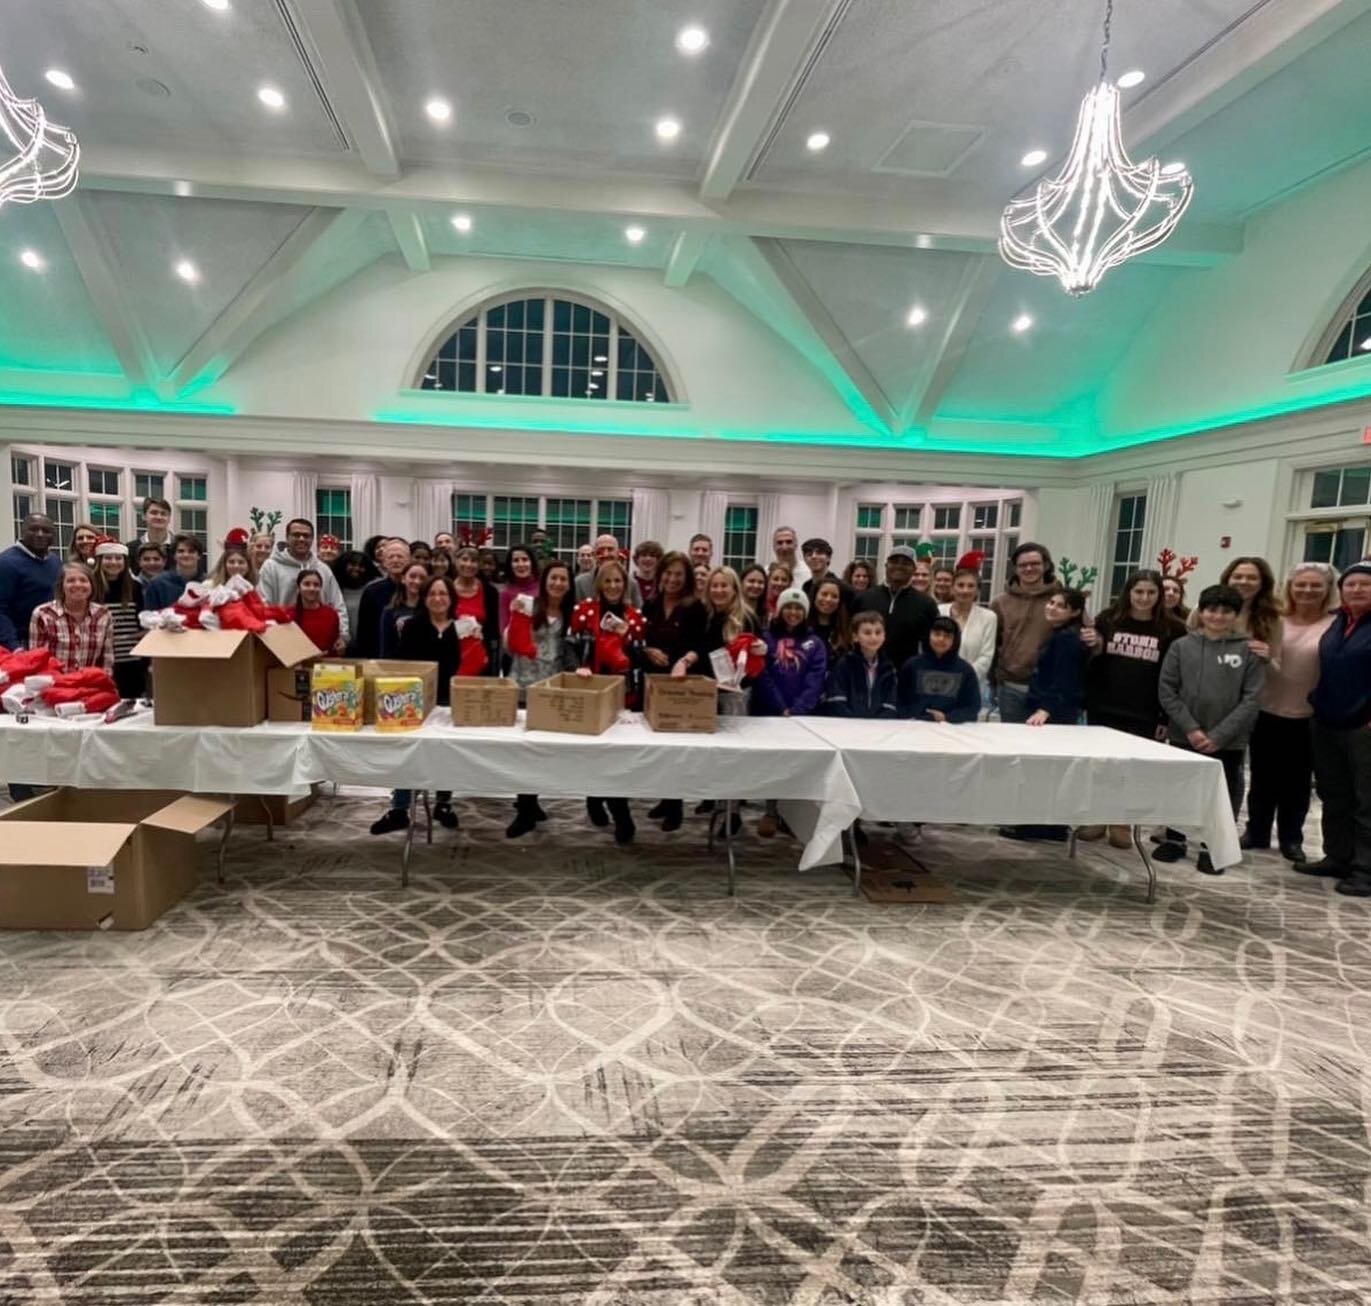 We are grateful to have so many amazing helpers making our holiday gift giving program successful! With the help of our generous donors and volunteers, we will provide wrapped gifts, new hats, gloves and other essentials to over 300 students and staf